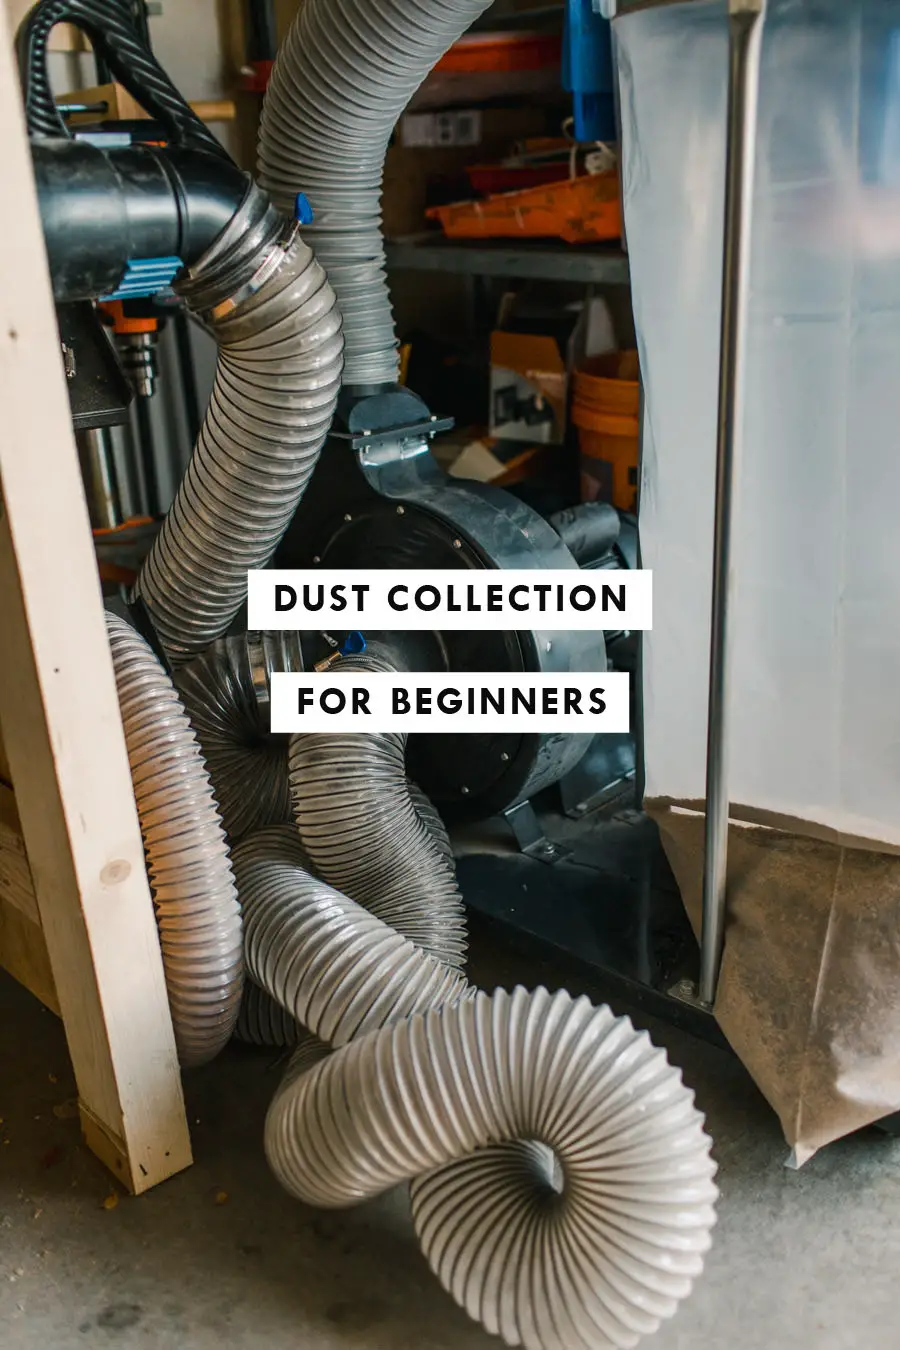 Dust Collection For Beginners Everything You Need to Know to Get Started